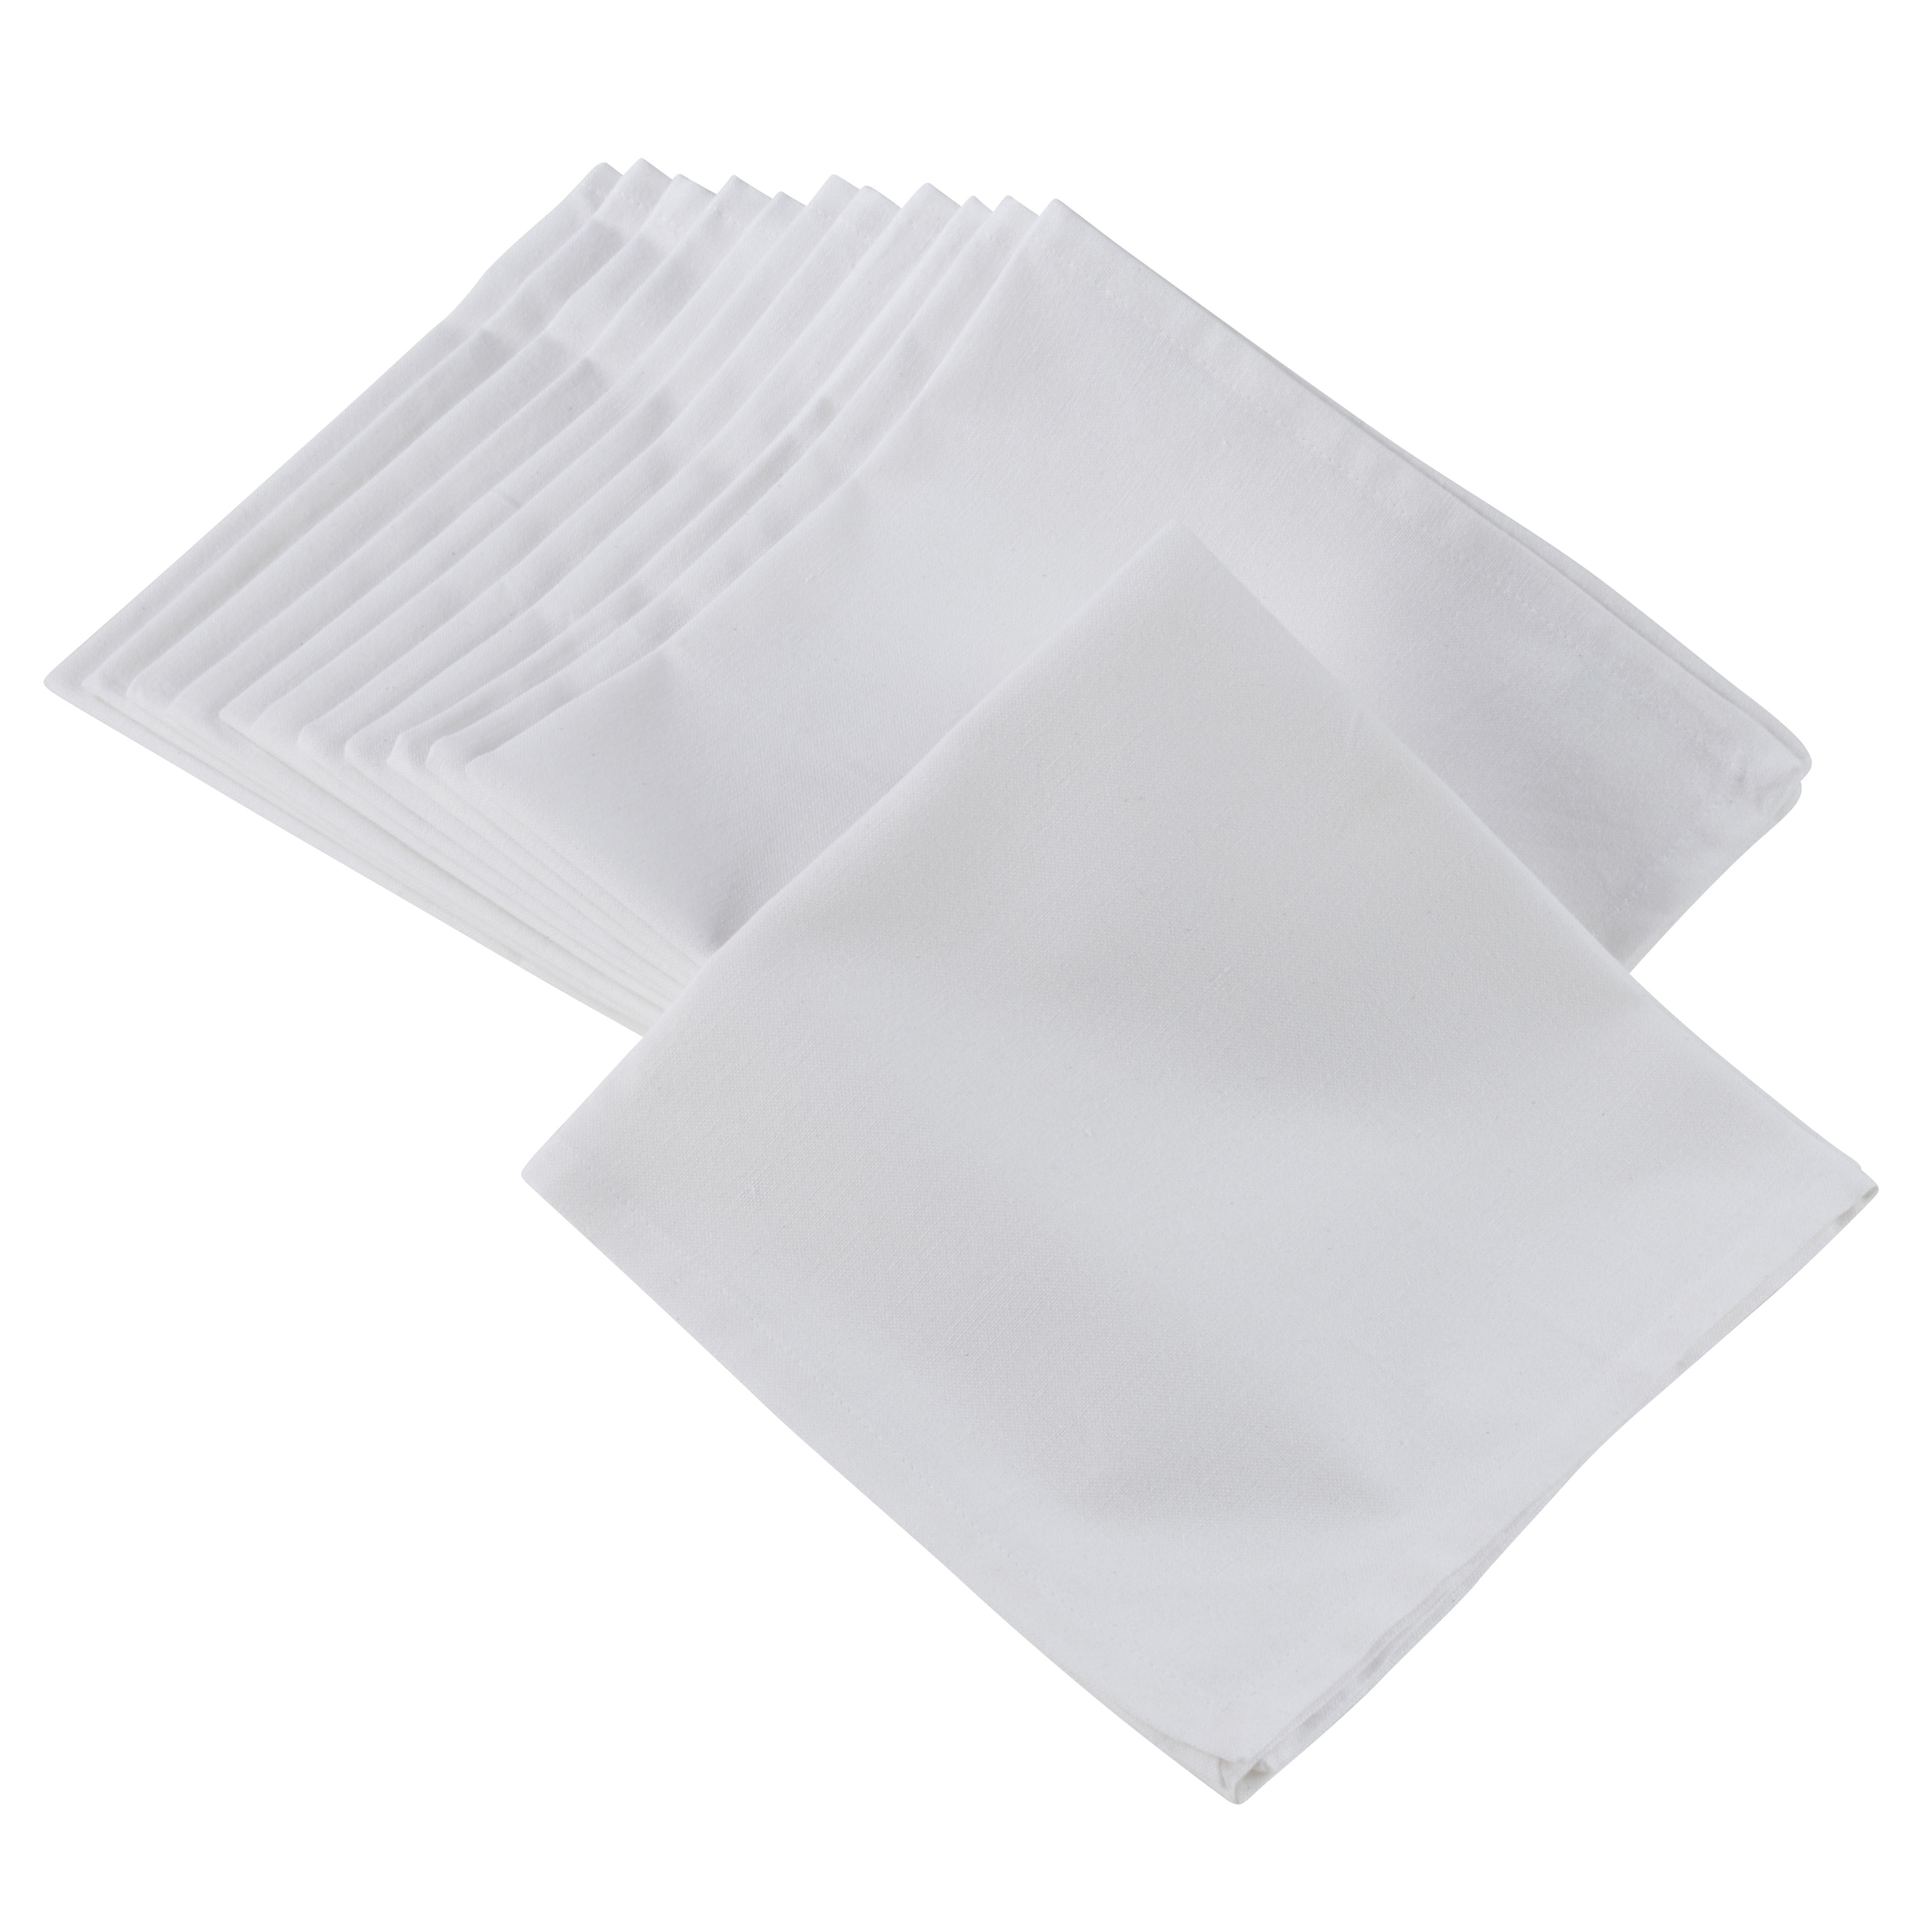 https://ak1.ostkcdn.com/images/products/22736454/100-Cotton-Square-Dinner-Napkins-In-Solid-Colors-Set-of-12-ac671450-4653-4b22-ac08-925582f9f9e2.jpg